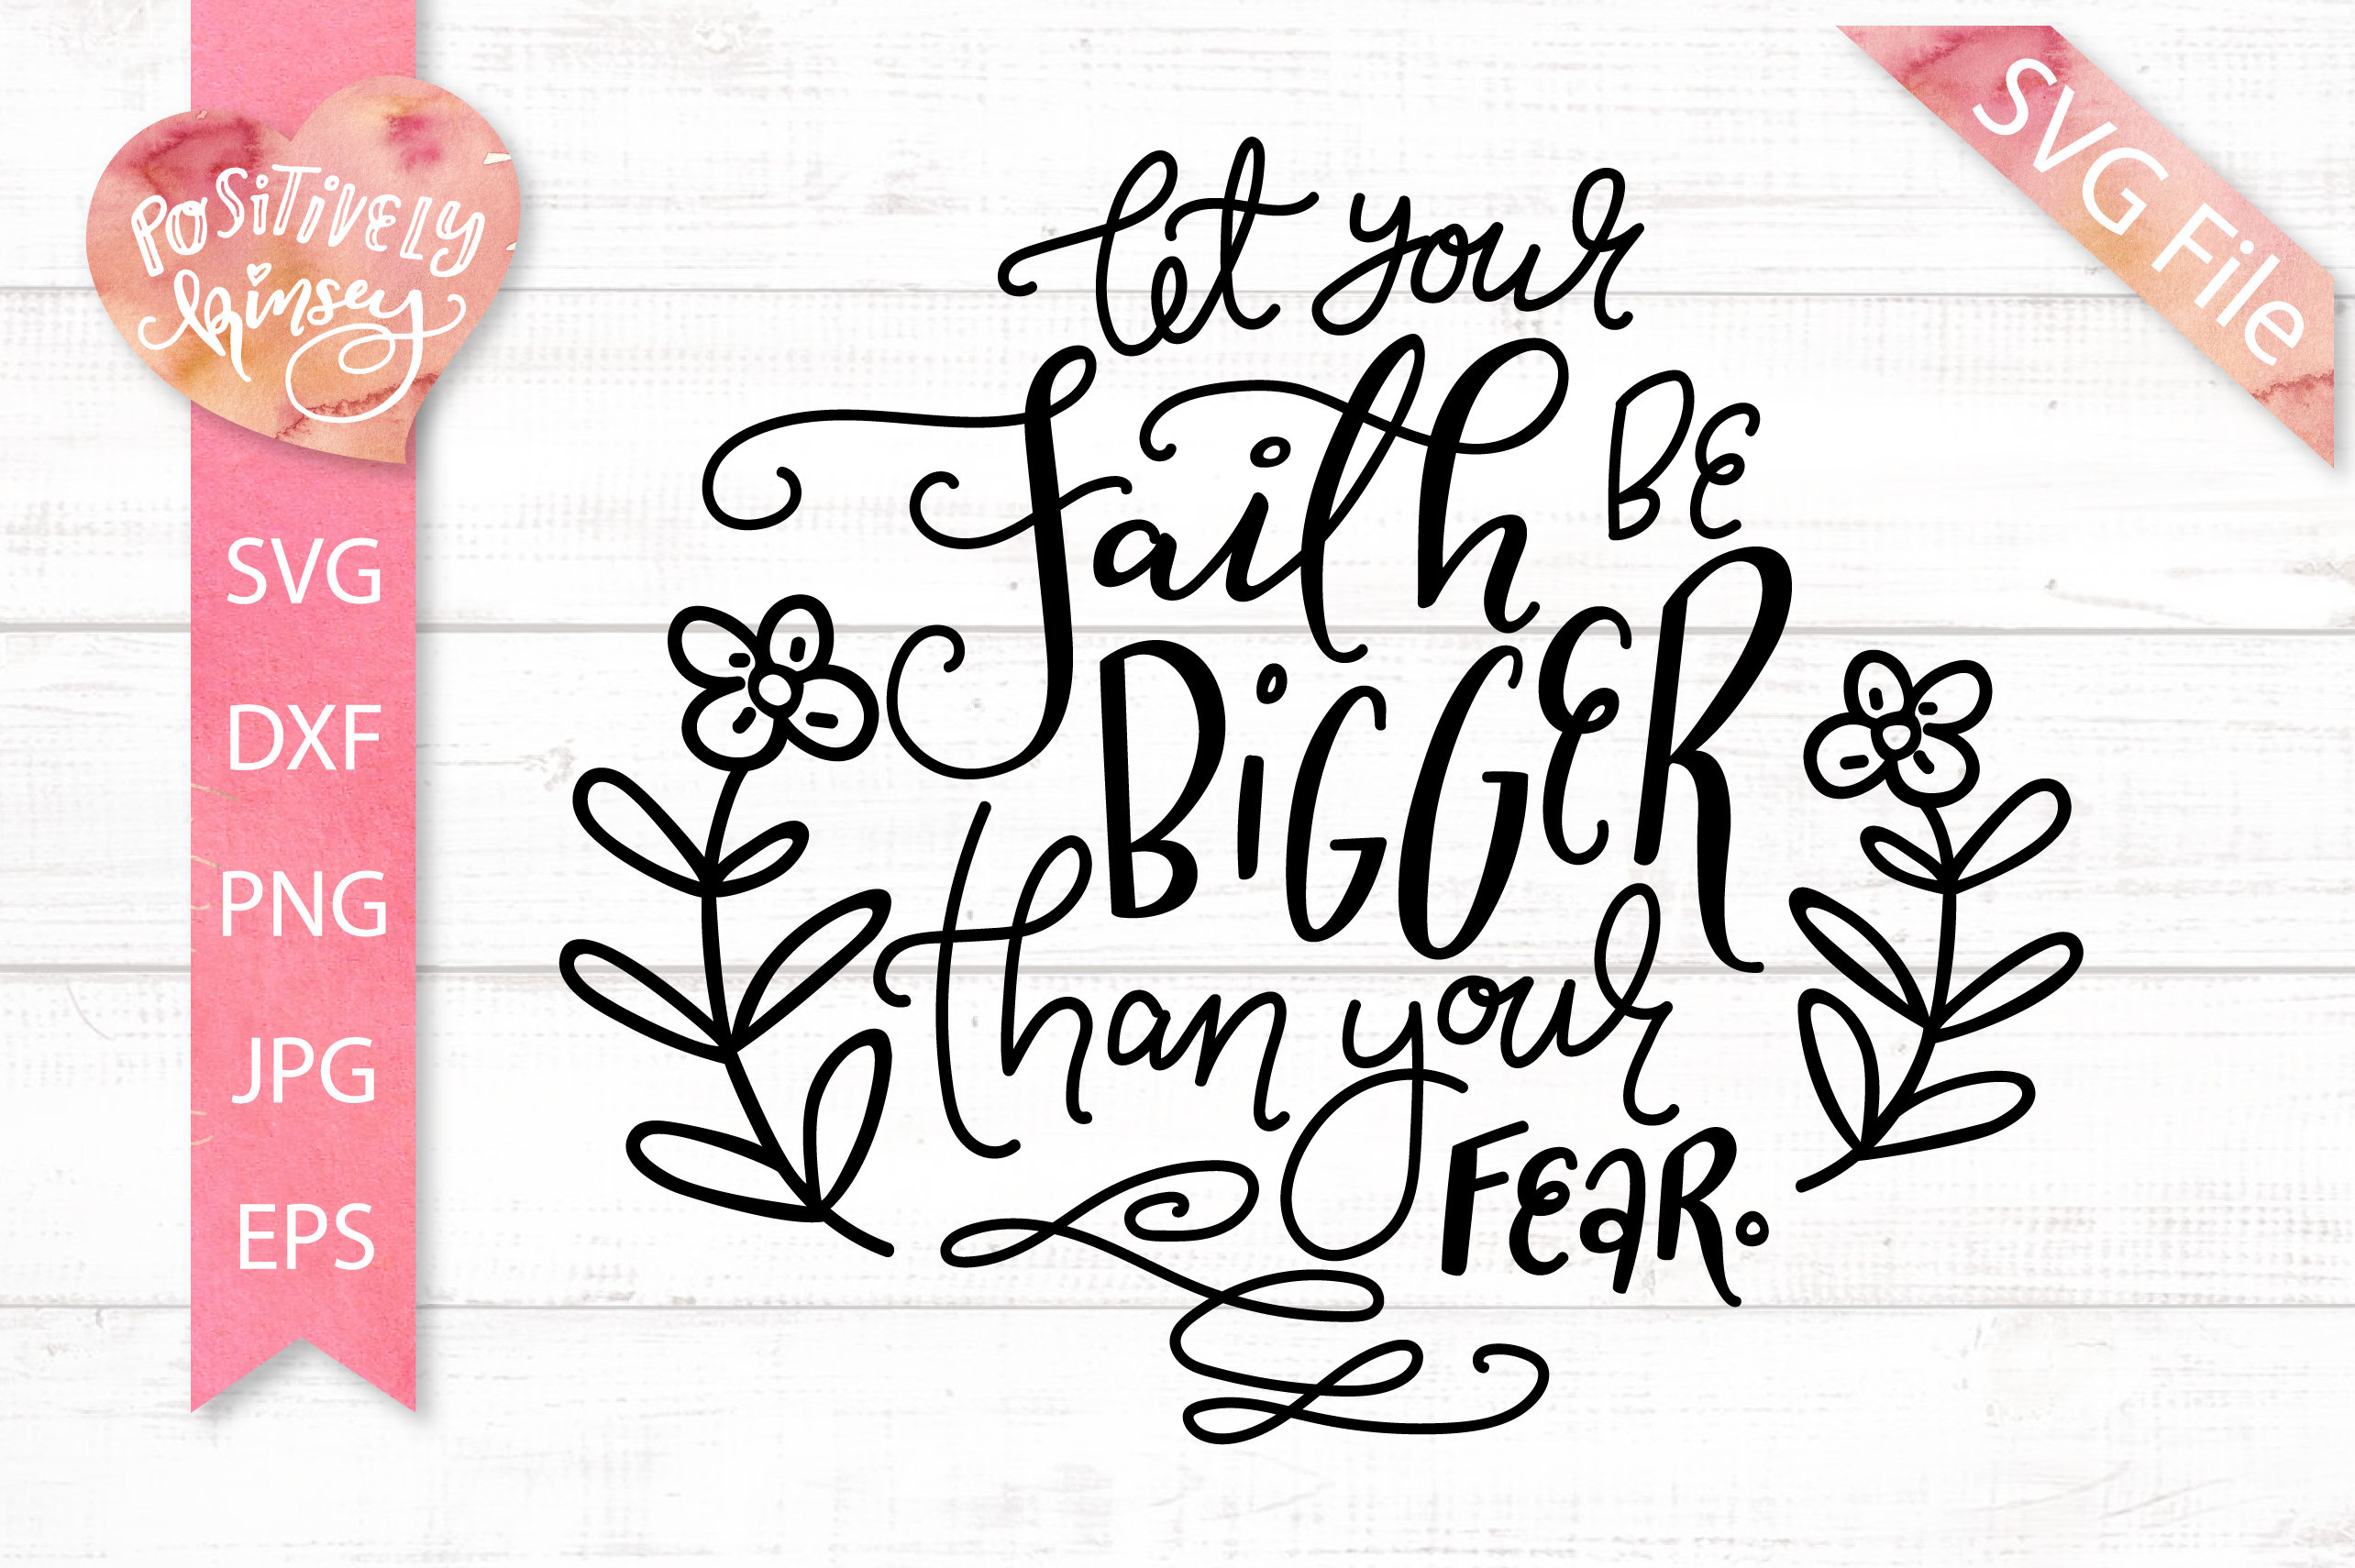 faith-svg-dxf-png-eps-jpg-christian-bible-verse-quote-svg